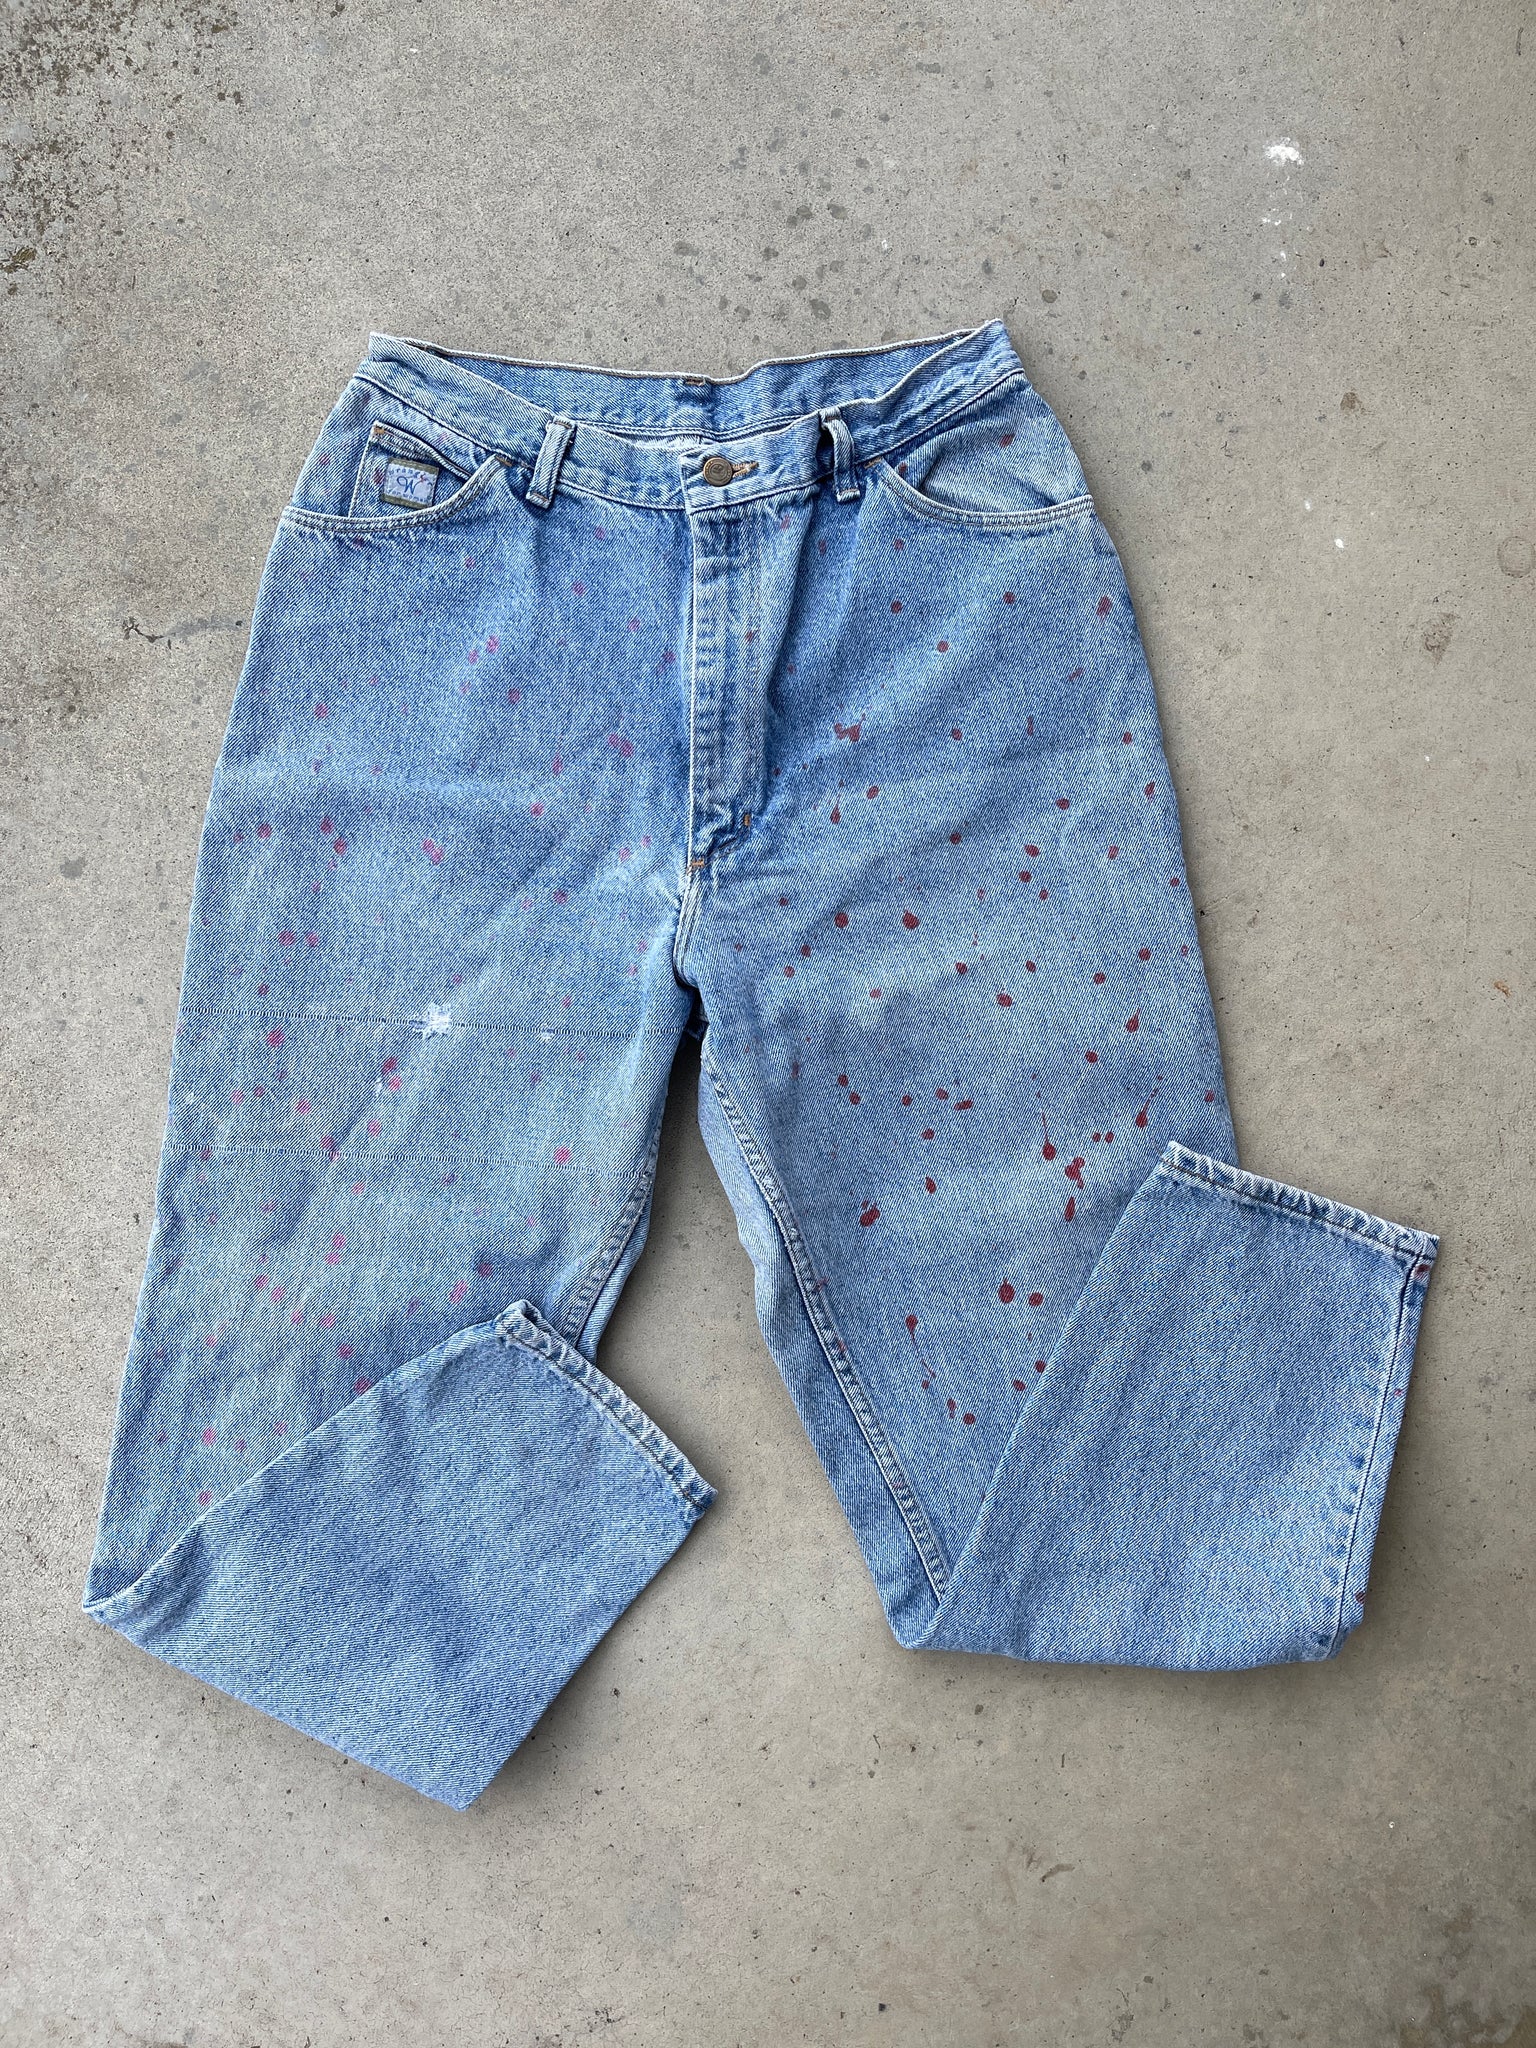 30" wrangler painted jeans